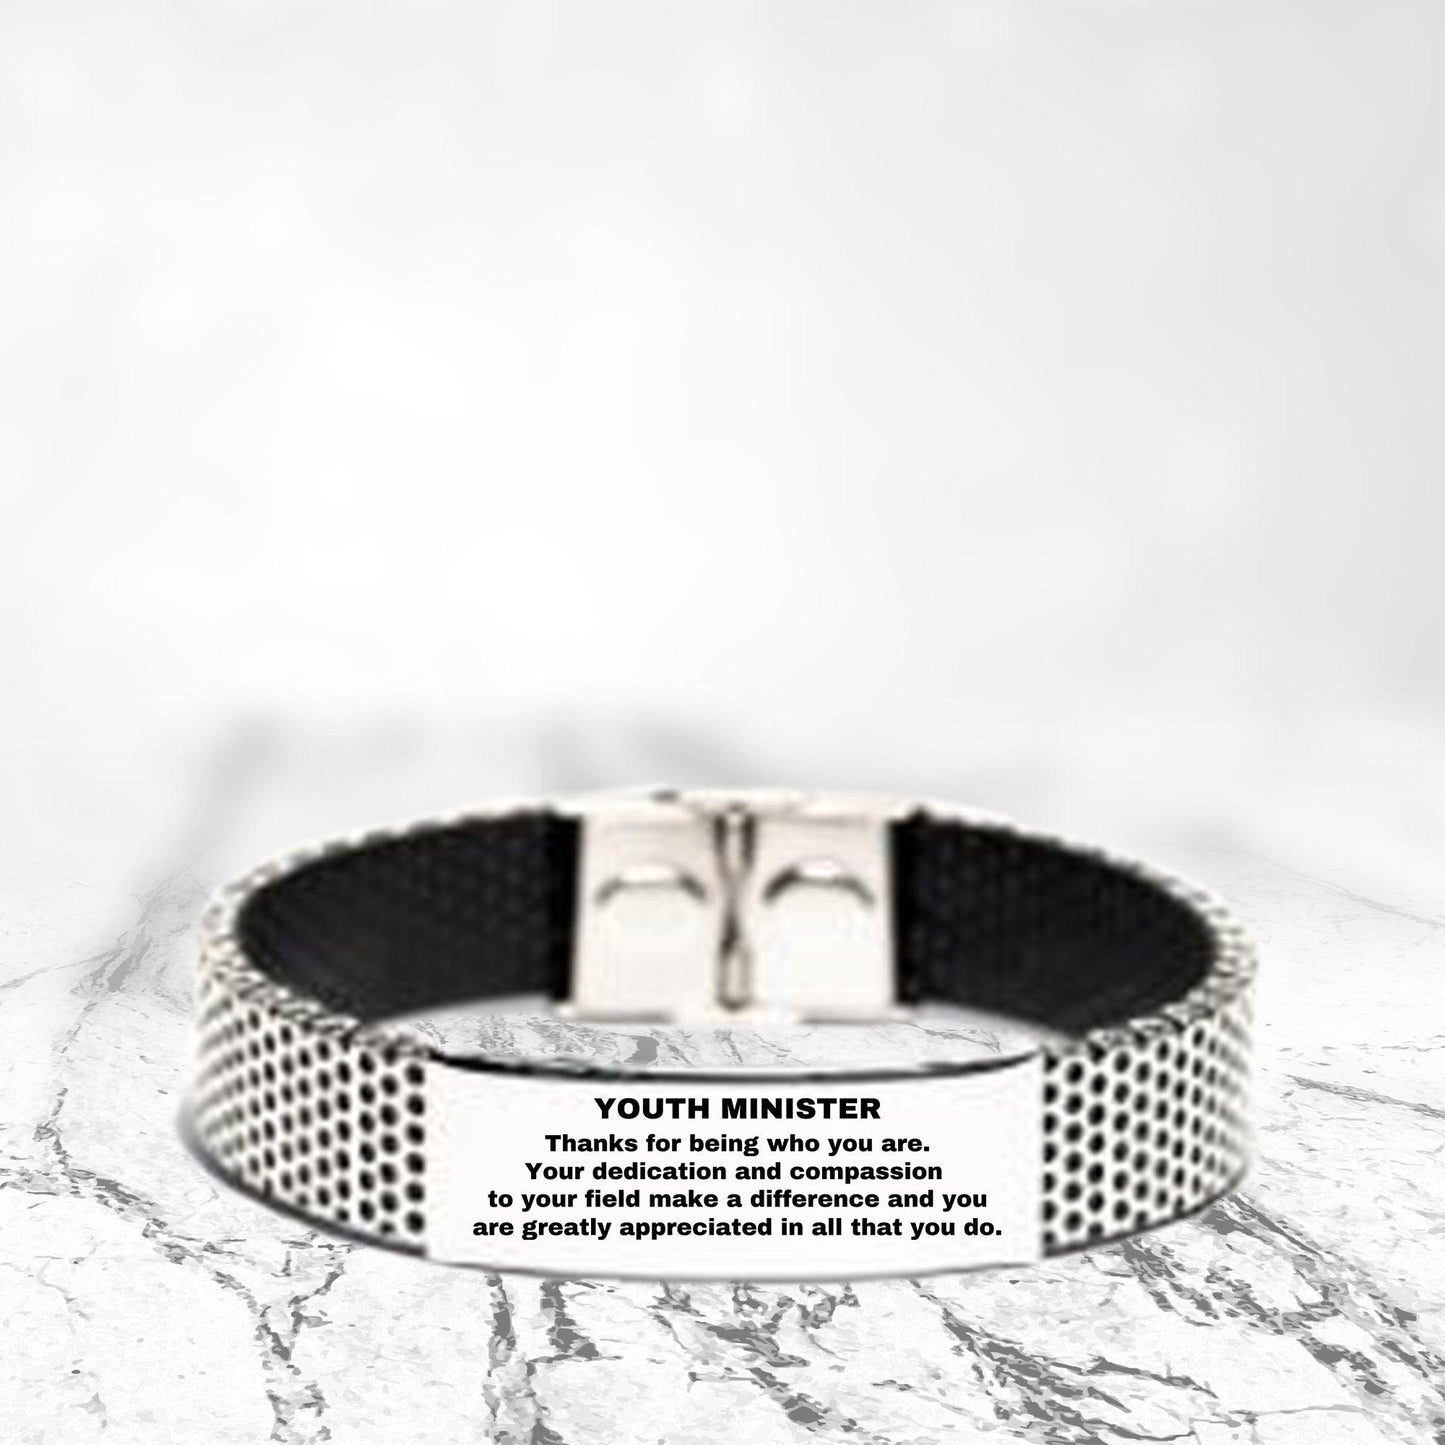 Youth Minister Silver Shark Mesh Stainless Steel Engraved Bracelet - Thanks for being who you are - Birthday Christmas Jewelry Gifts Coworkers Colleague Boss - Mallard Moon Gift Shop